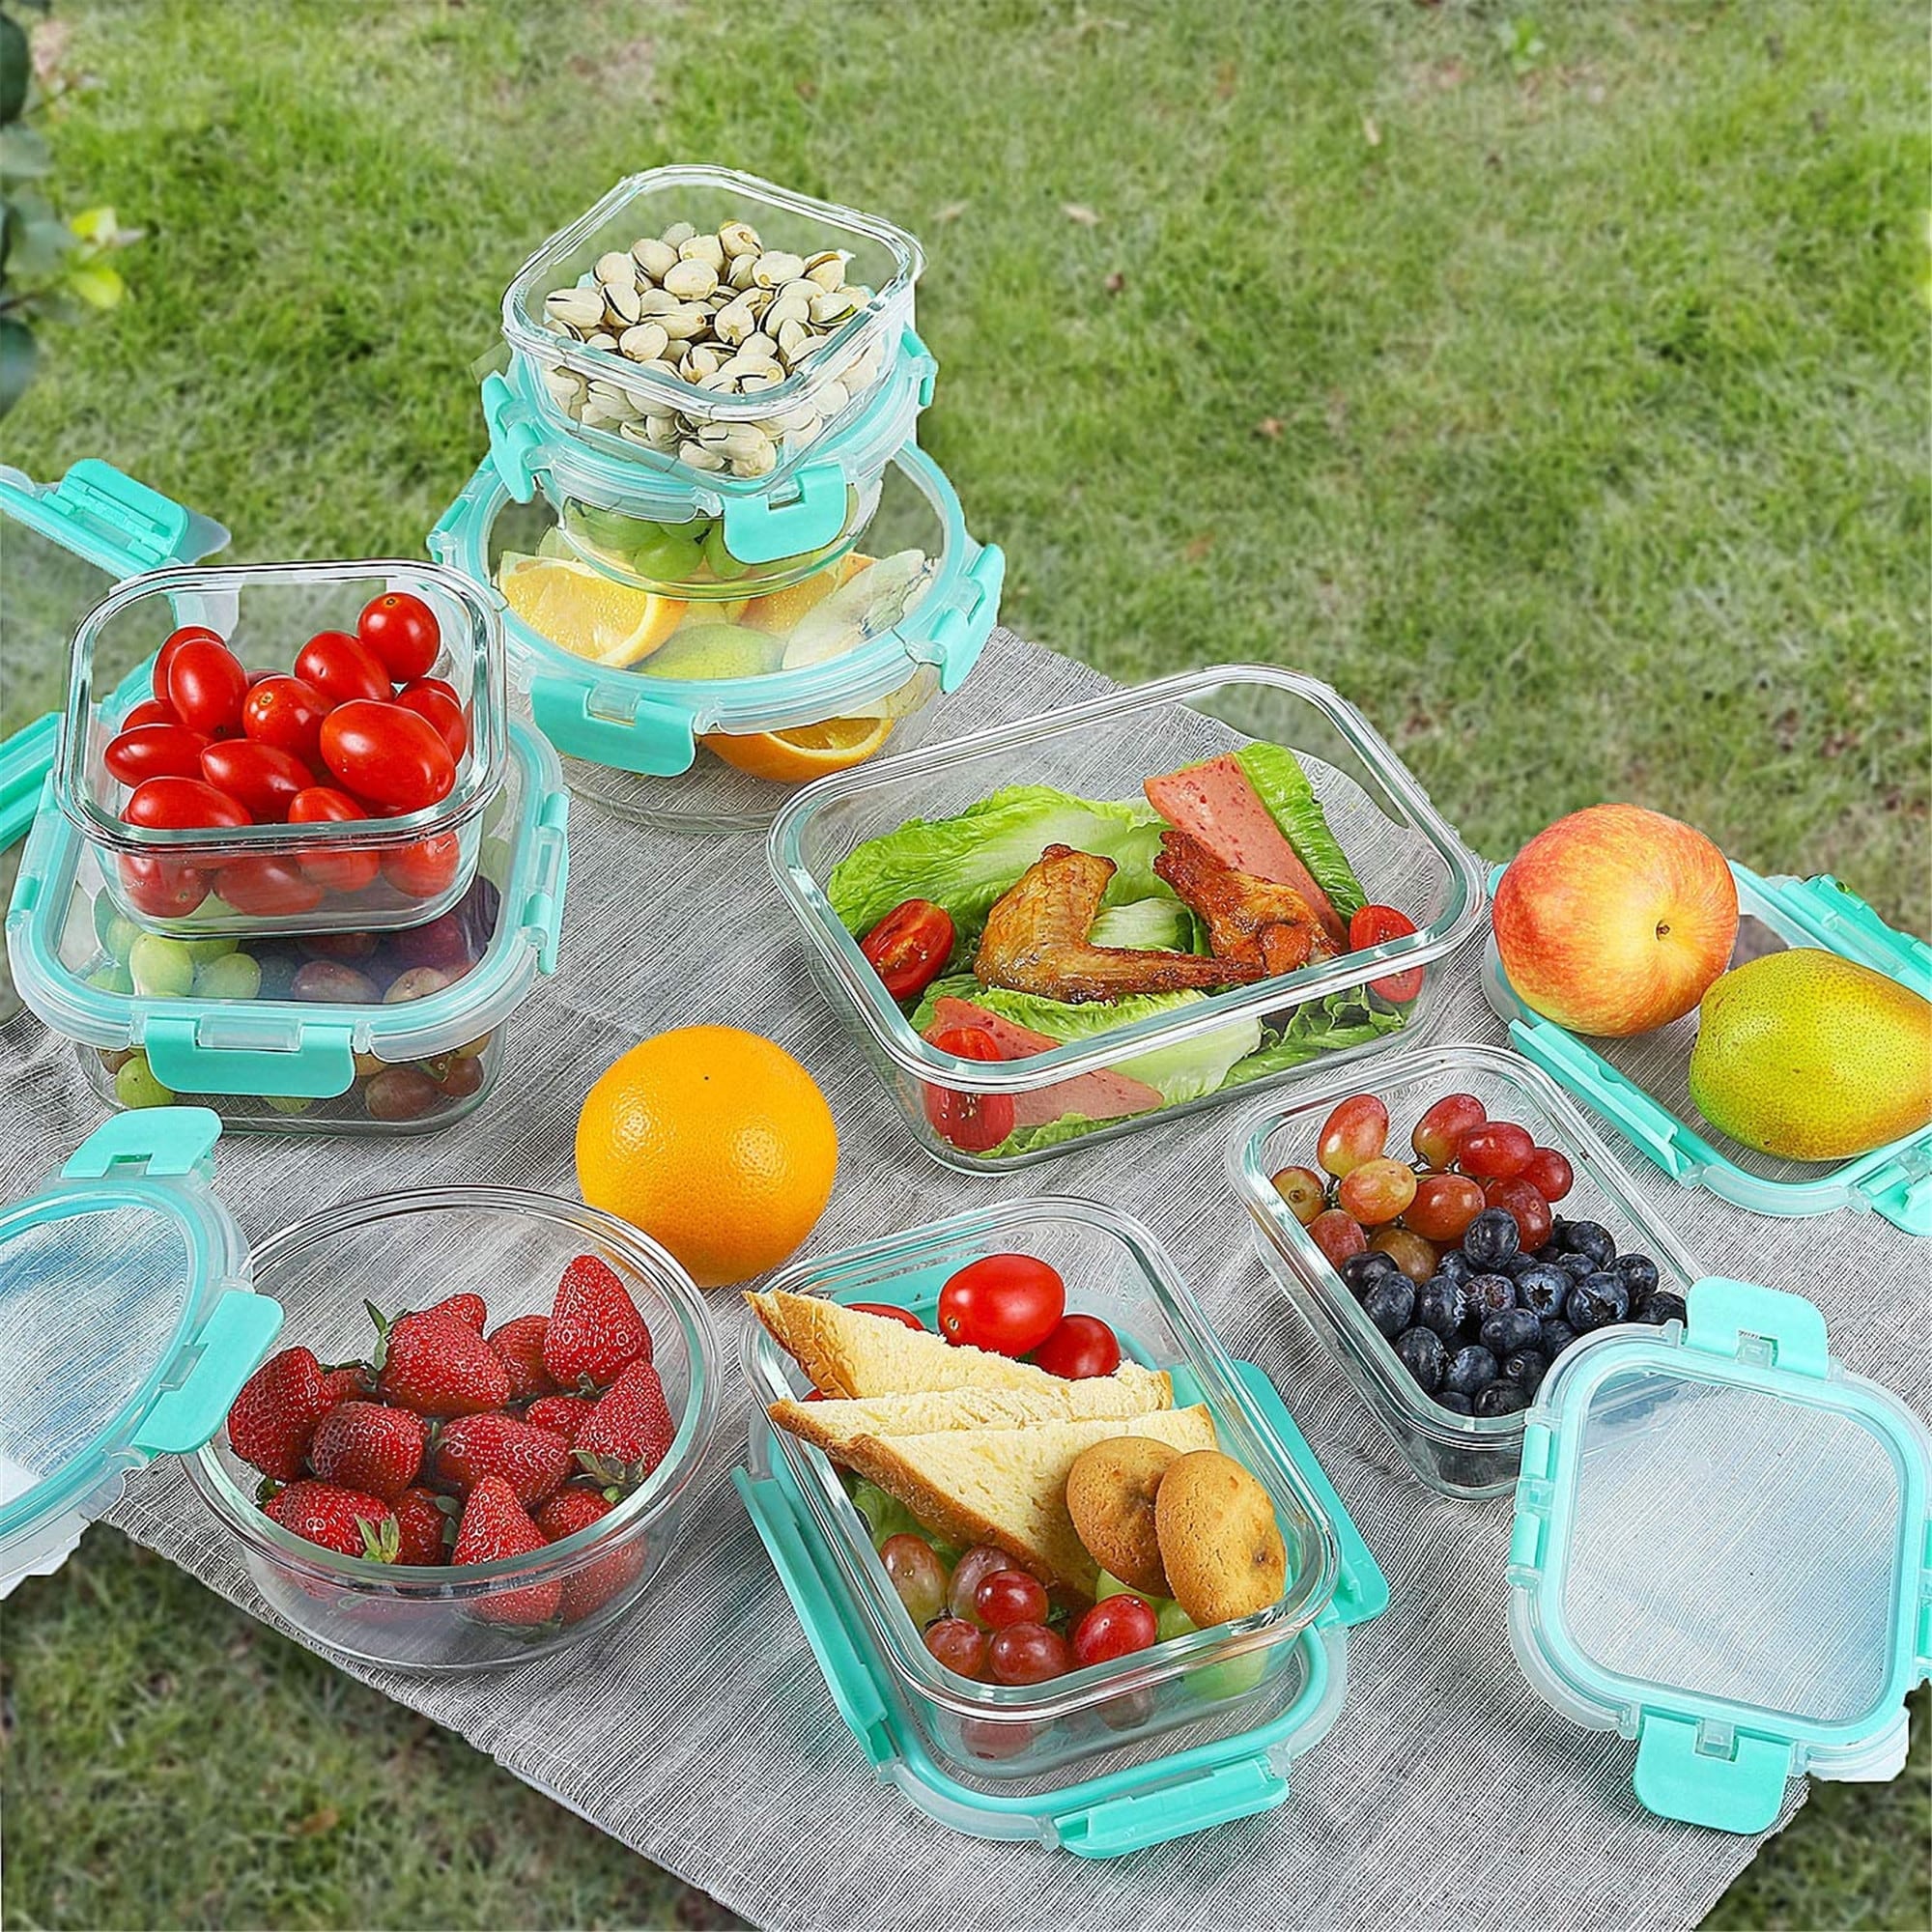 https://ak1.ostkcdn.com/images/products/is/images/direct/dc4adb48ed6899339a73779b1cd3732e069044ce/Glass-Food-Storage-Containers-with-Lids%2C-%5B18-Piece%5D-Glass-Meal-Prep-Containers%2C-BPA-Free-%26-Leak-Proof-%289-lids-%26-9-Containers%29.jpg